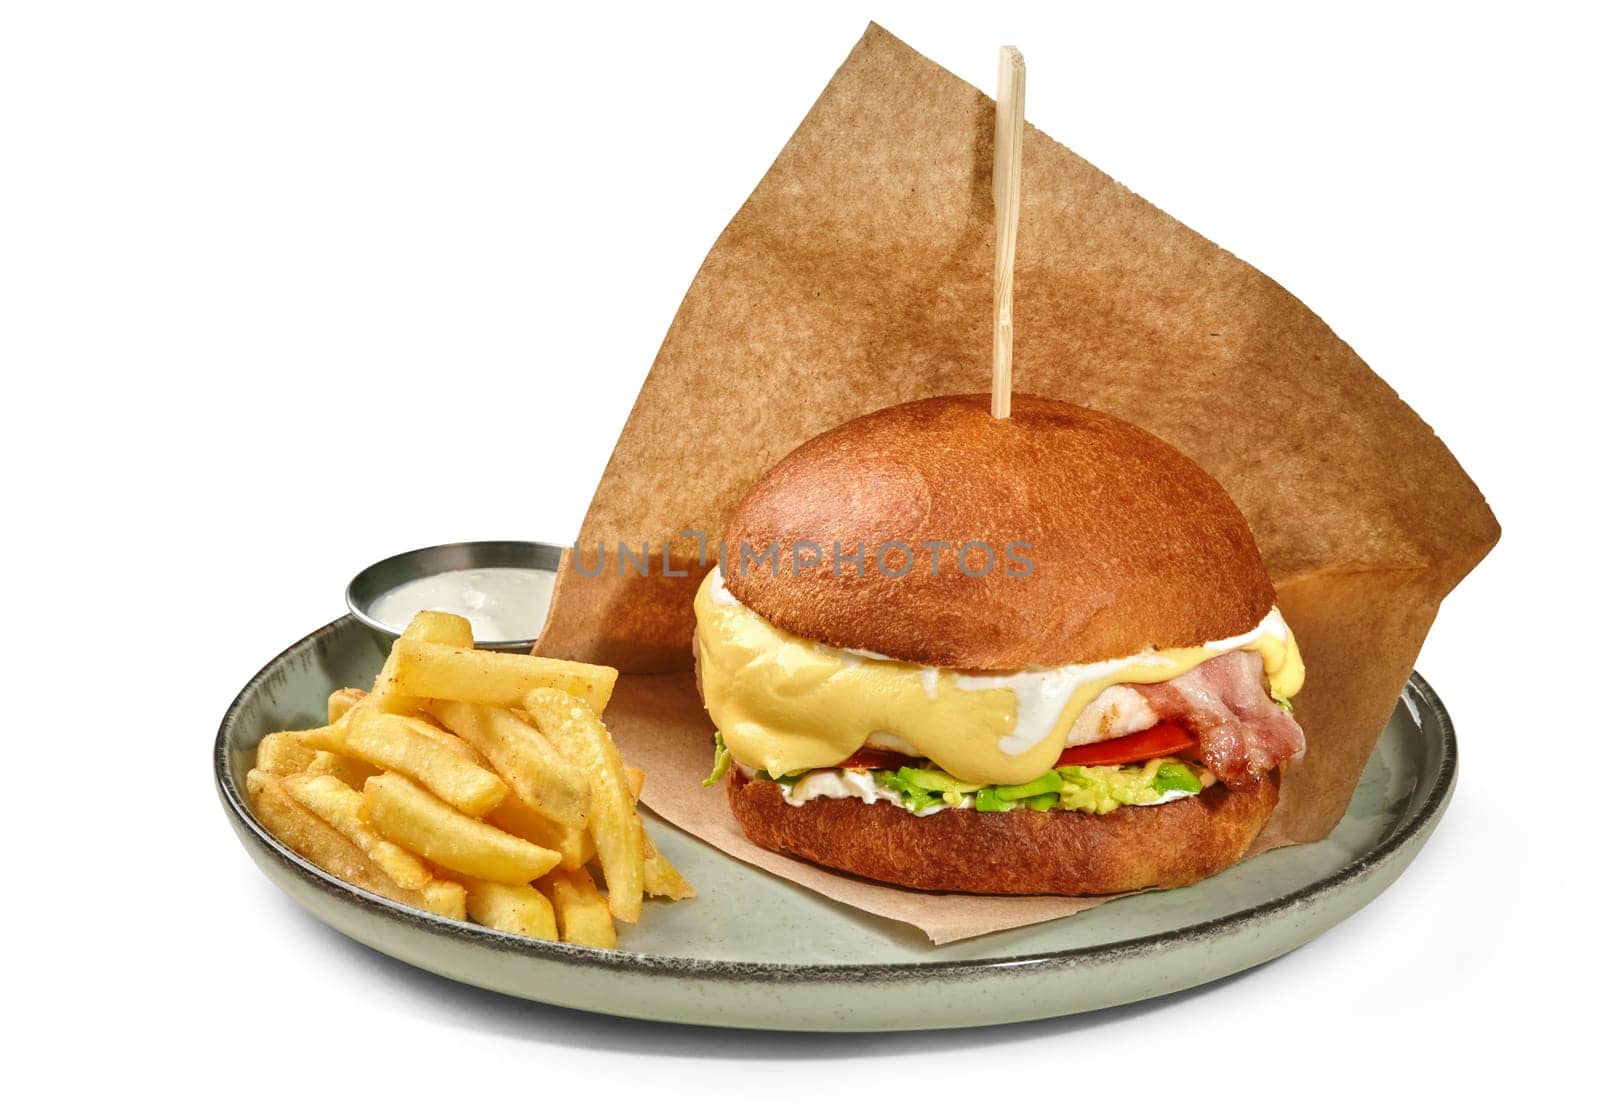 Appetizing chicken burger in fluffy browned bun with fried bacon slices, tomato, avocado and creamy cheese sauce wrapped in paper served with side of crispy fries on plate. Popular fast food concept